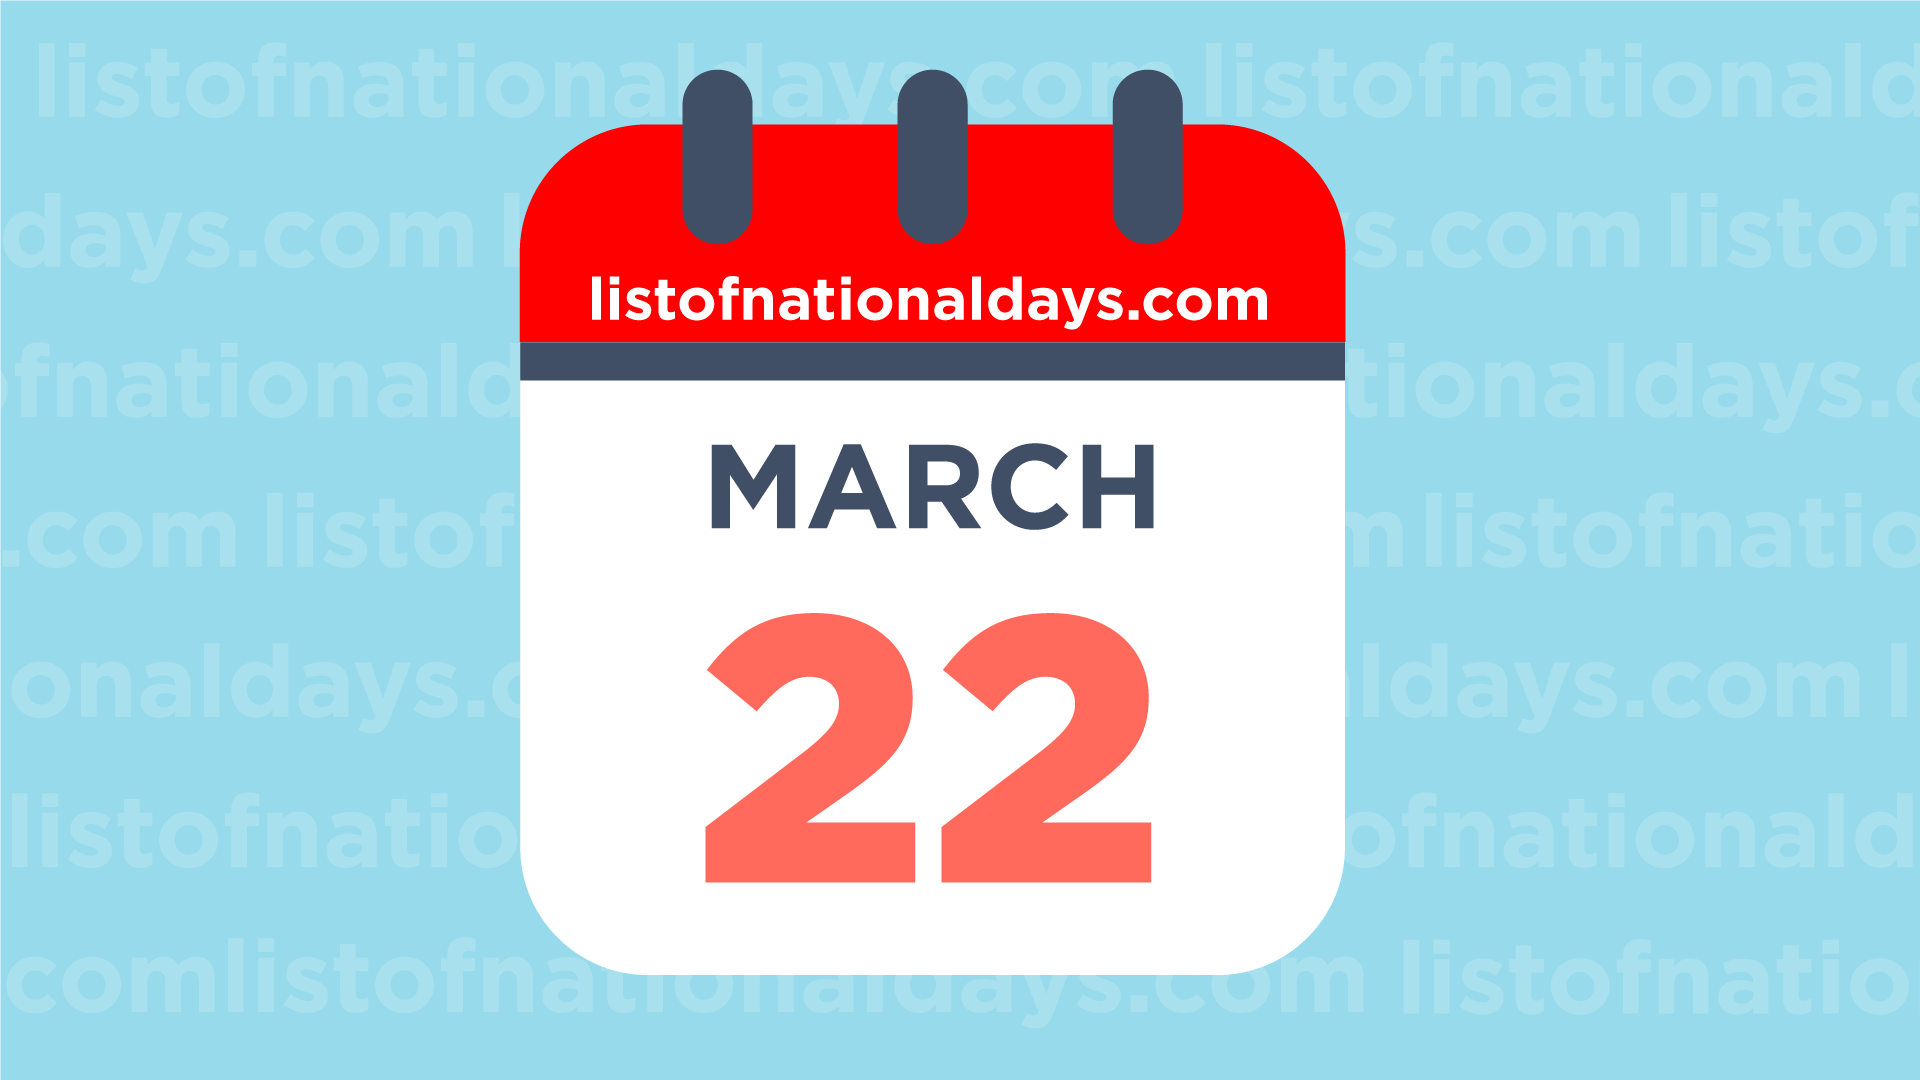 MARCH 22ND: National Holidays, Observances & Famous Birthdays